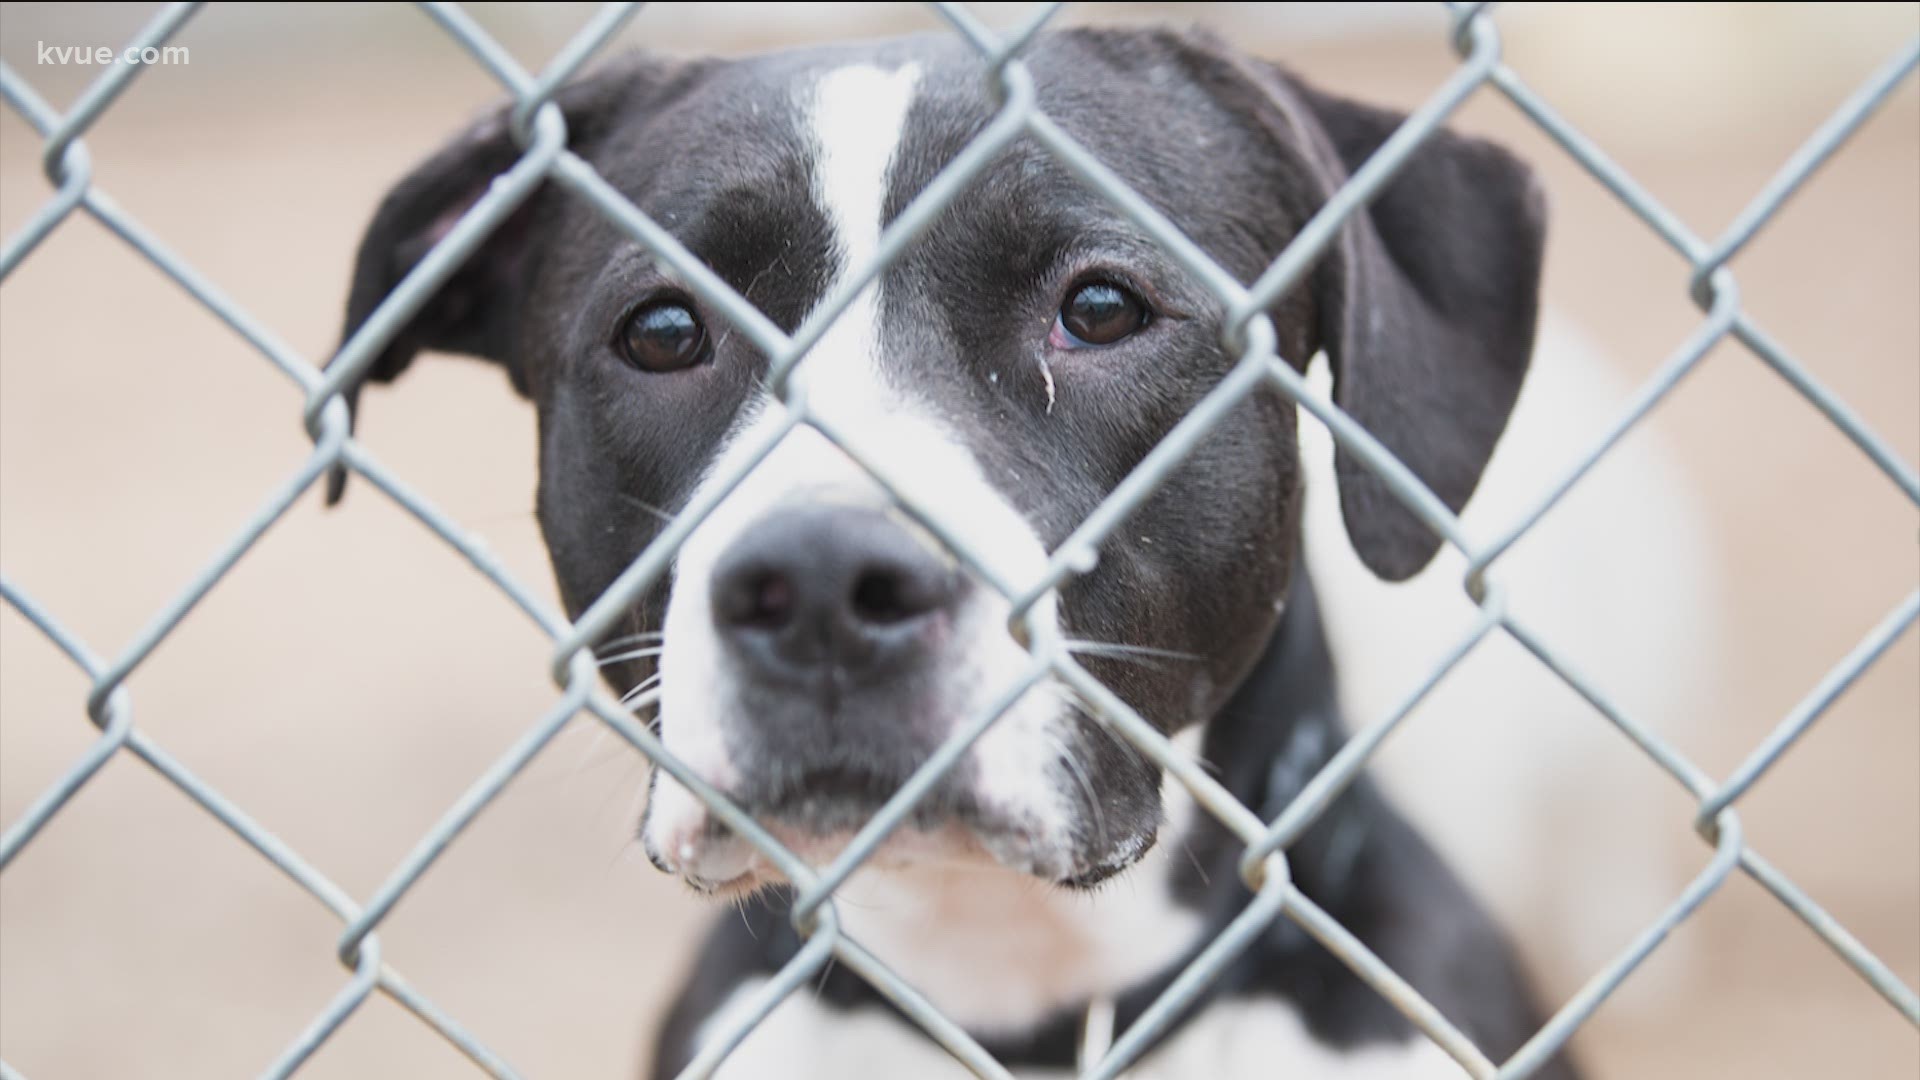 For the first time since the pandemic started, the Austin Animal Center is opening at 100% occupancy. They need you to stop by and adopt a pet.